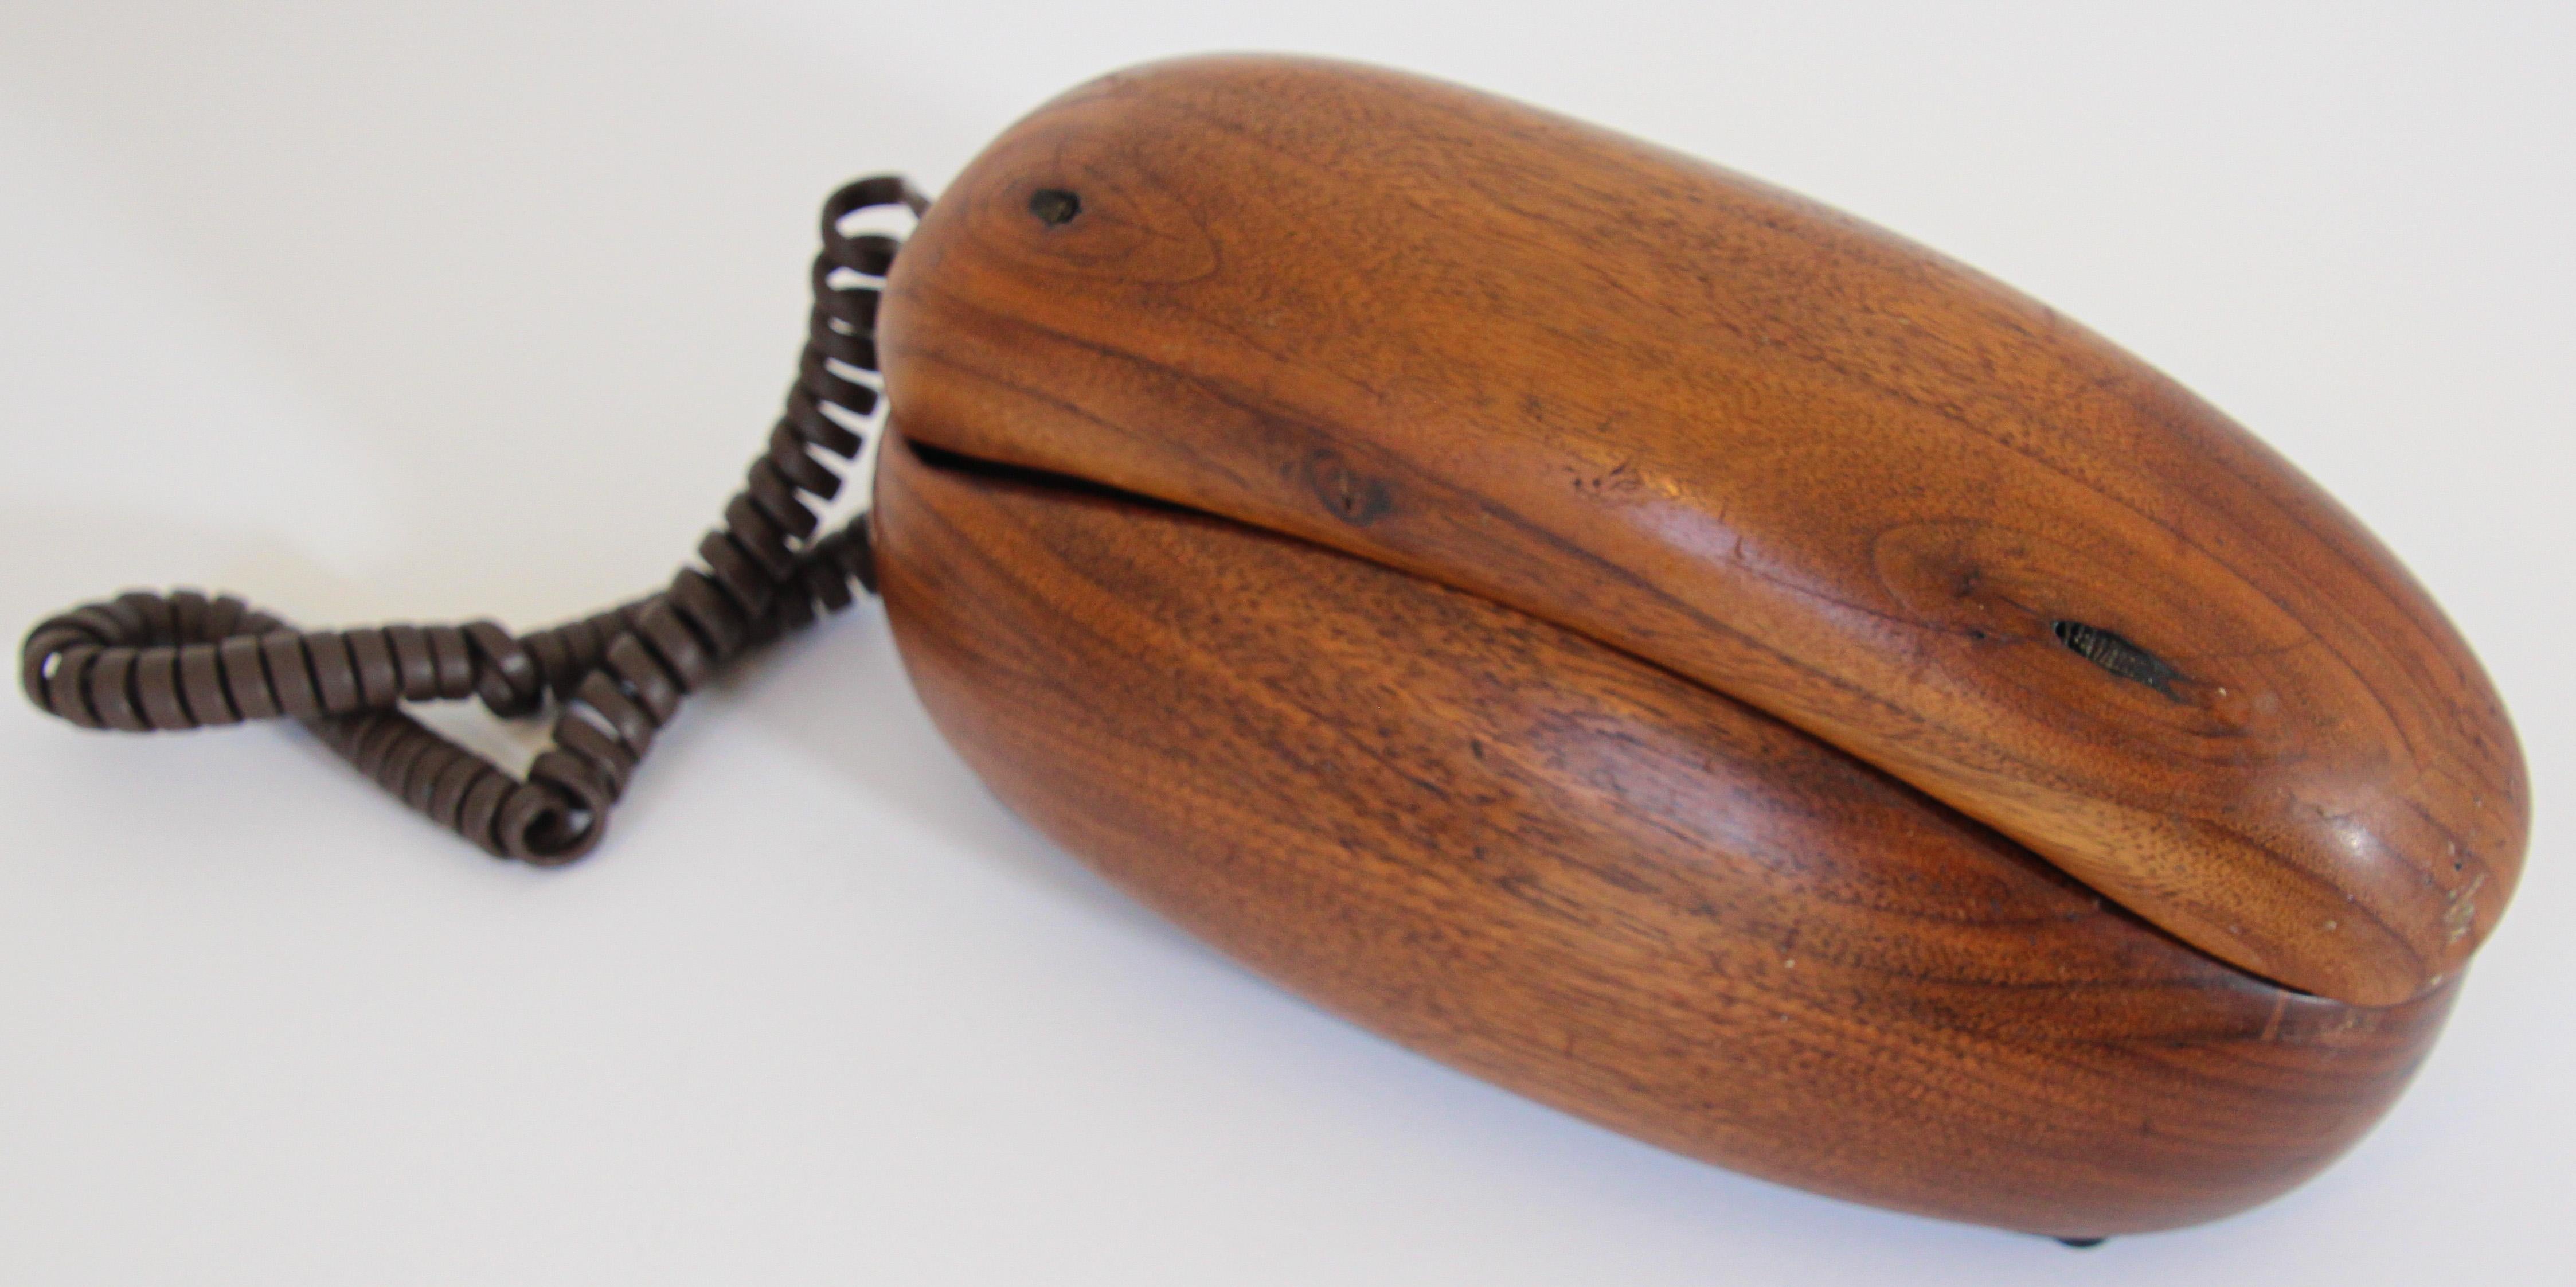 Vintage telephone covered in wood made in Asia, Singapore for 